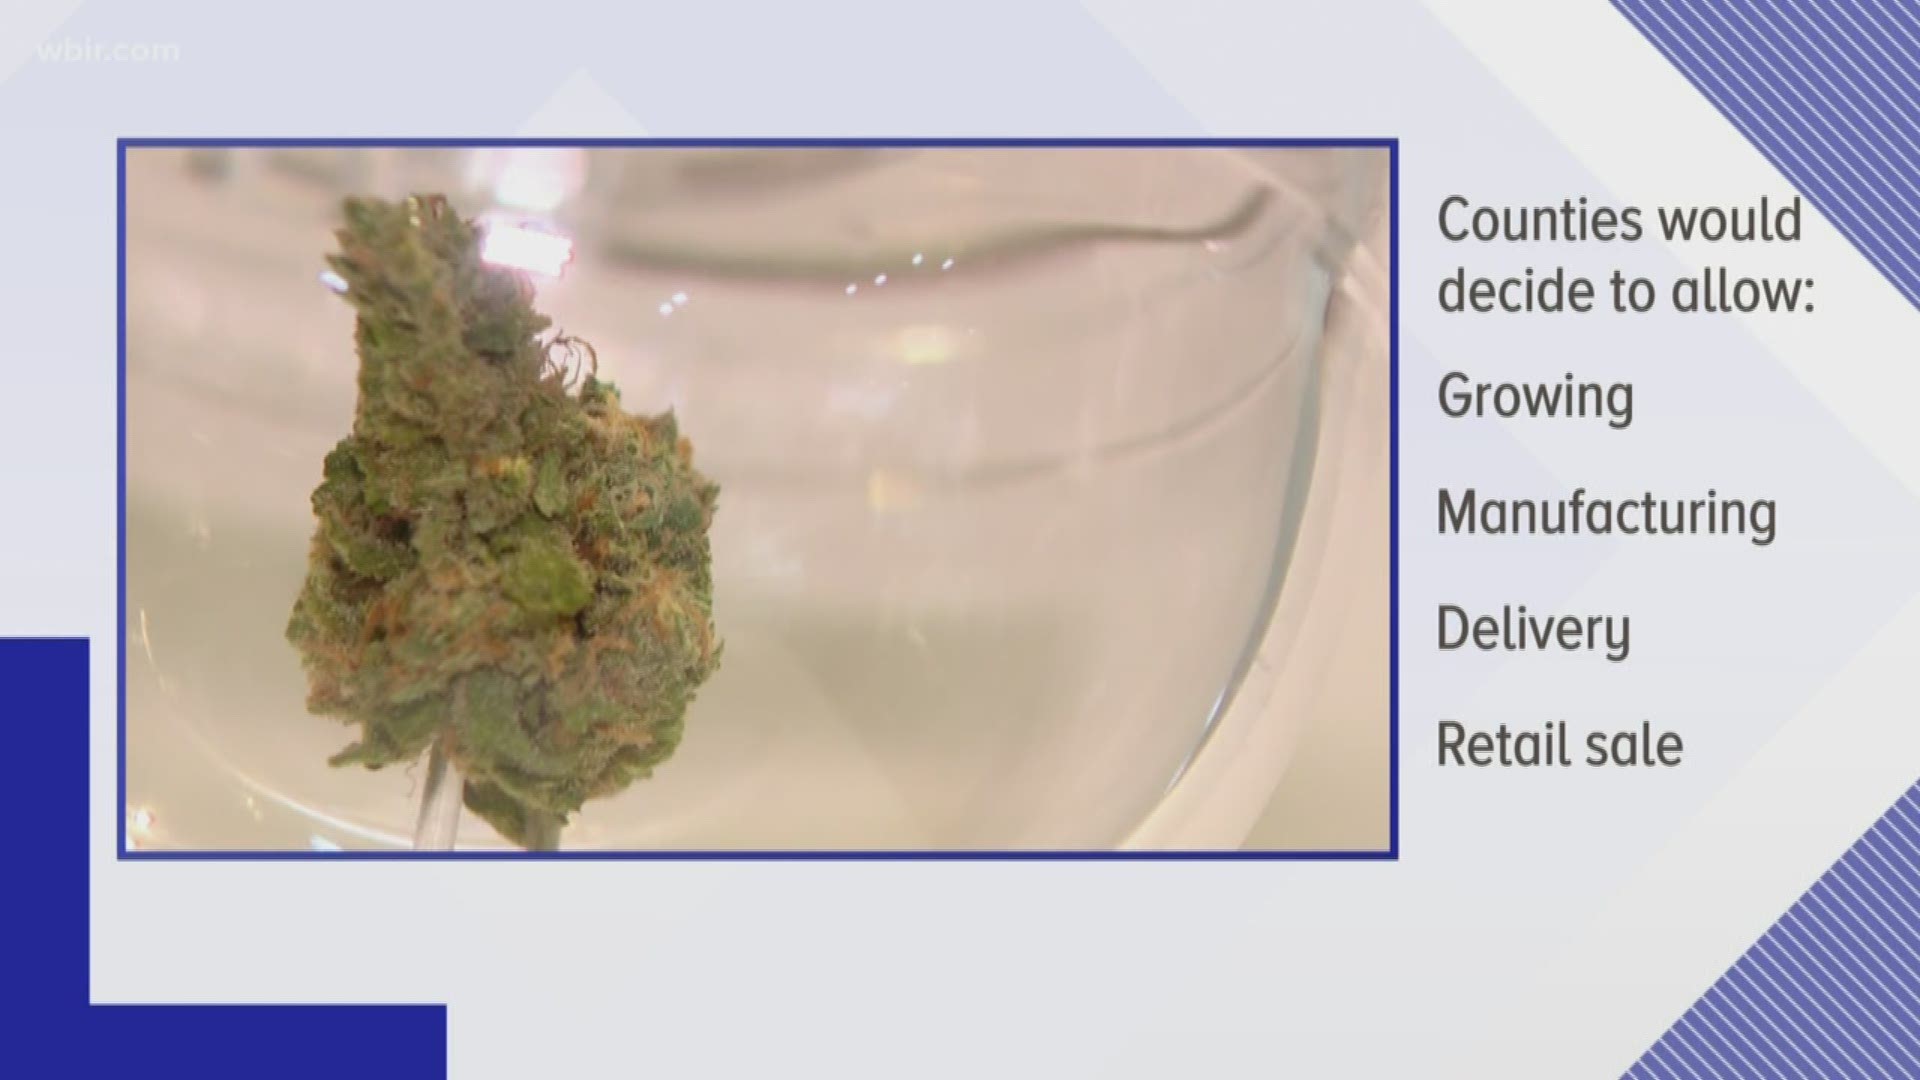 The bill would allow counties to hold referendum elections to allow the growing, processing, manufacture, delivery and retail sale of marijuana.